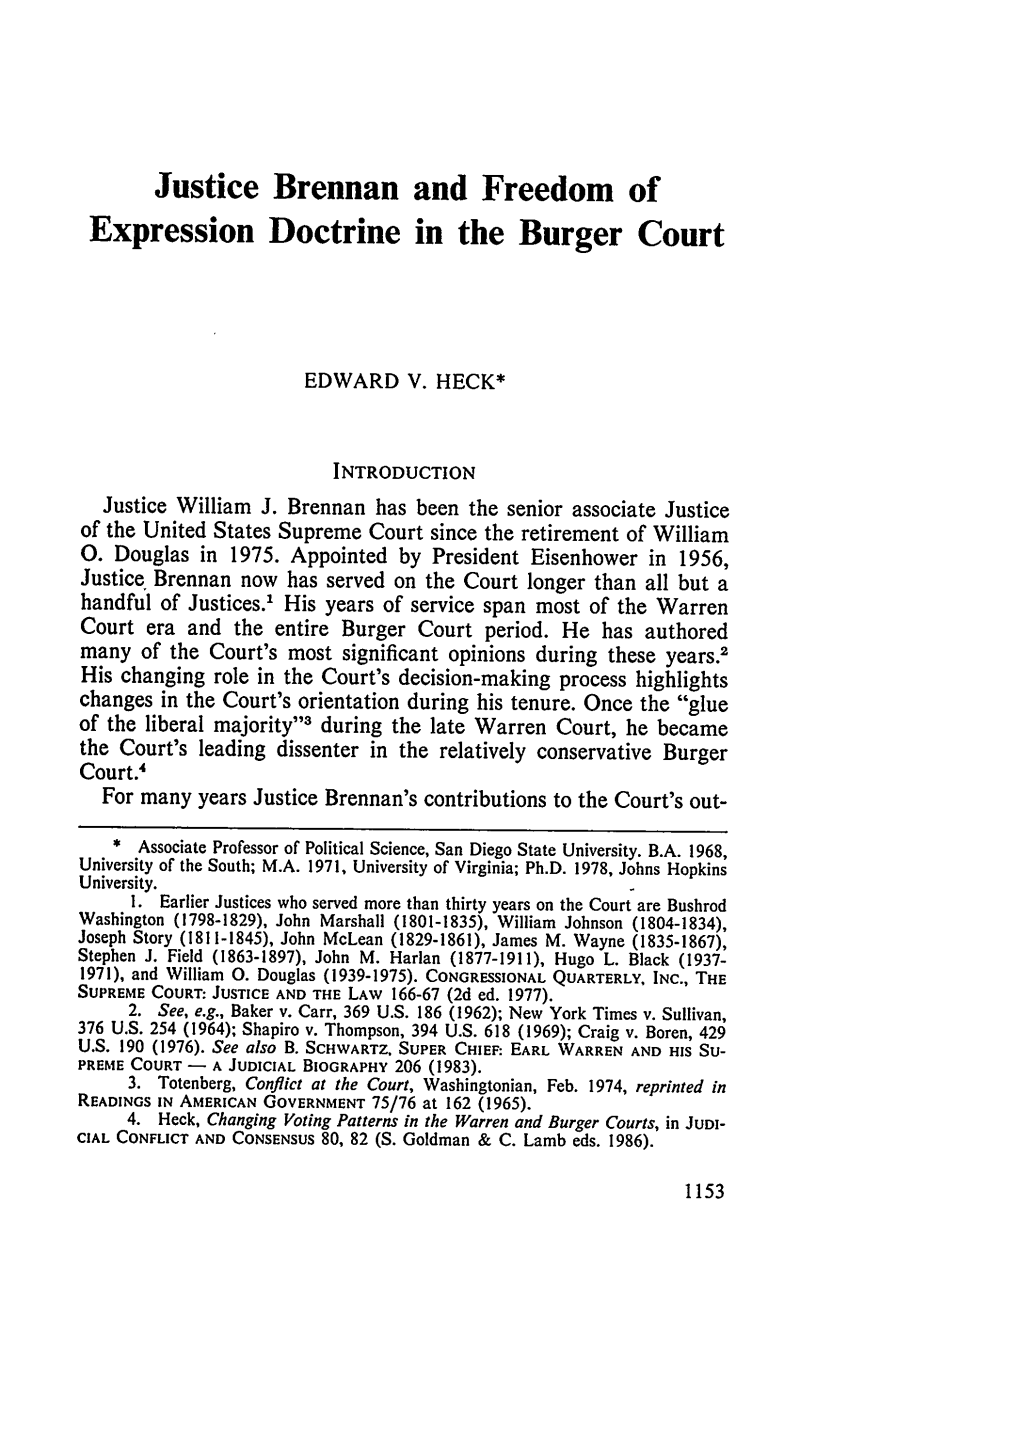 Justice Brennan and Freedom of Expression Doctrine in the Burger Court